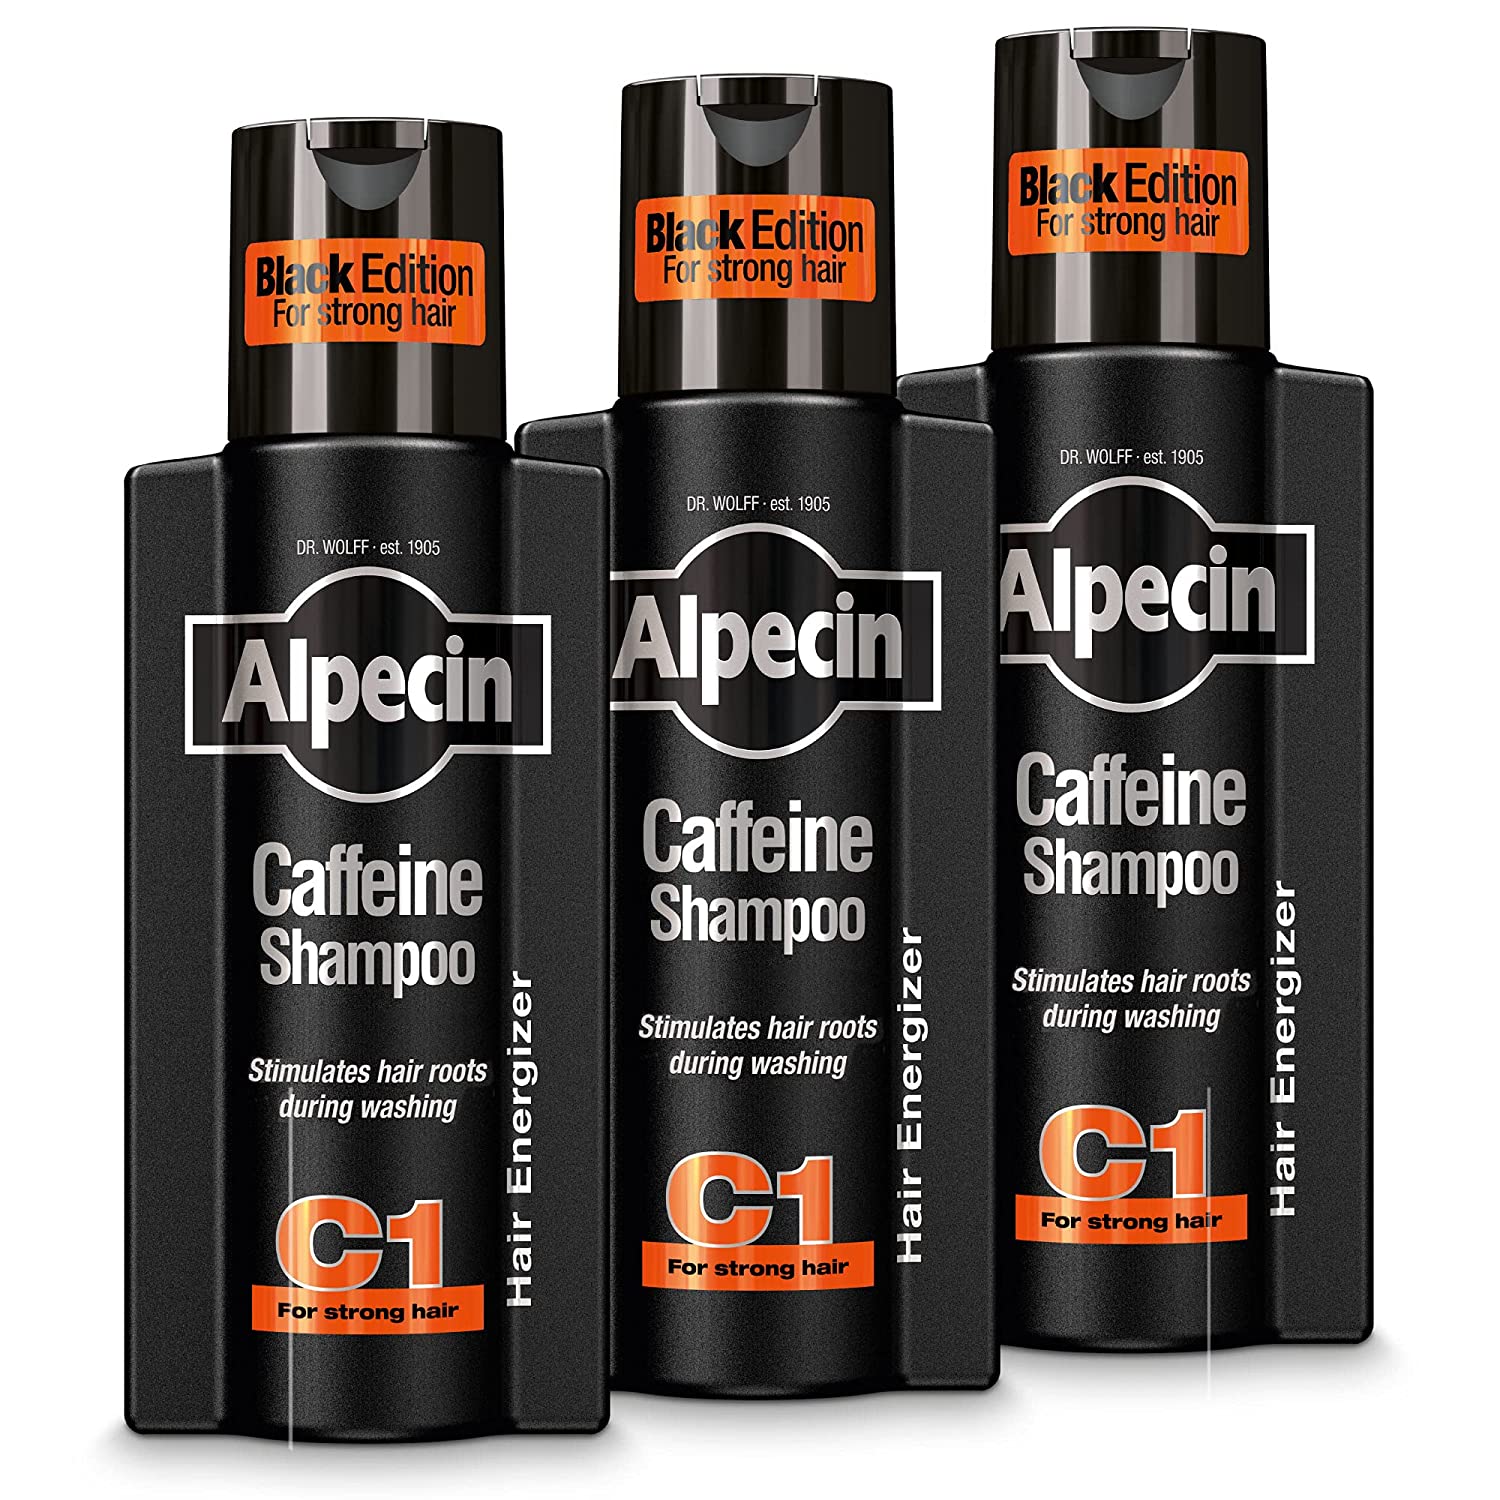 Alpecin Black Men\'s Shampoo with New Scent 3 x 250ml | Hair Growth Shampoo | Men\'s Shampoo for Natural Strong Hair | Hair Care for Men Made in Germany